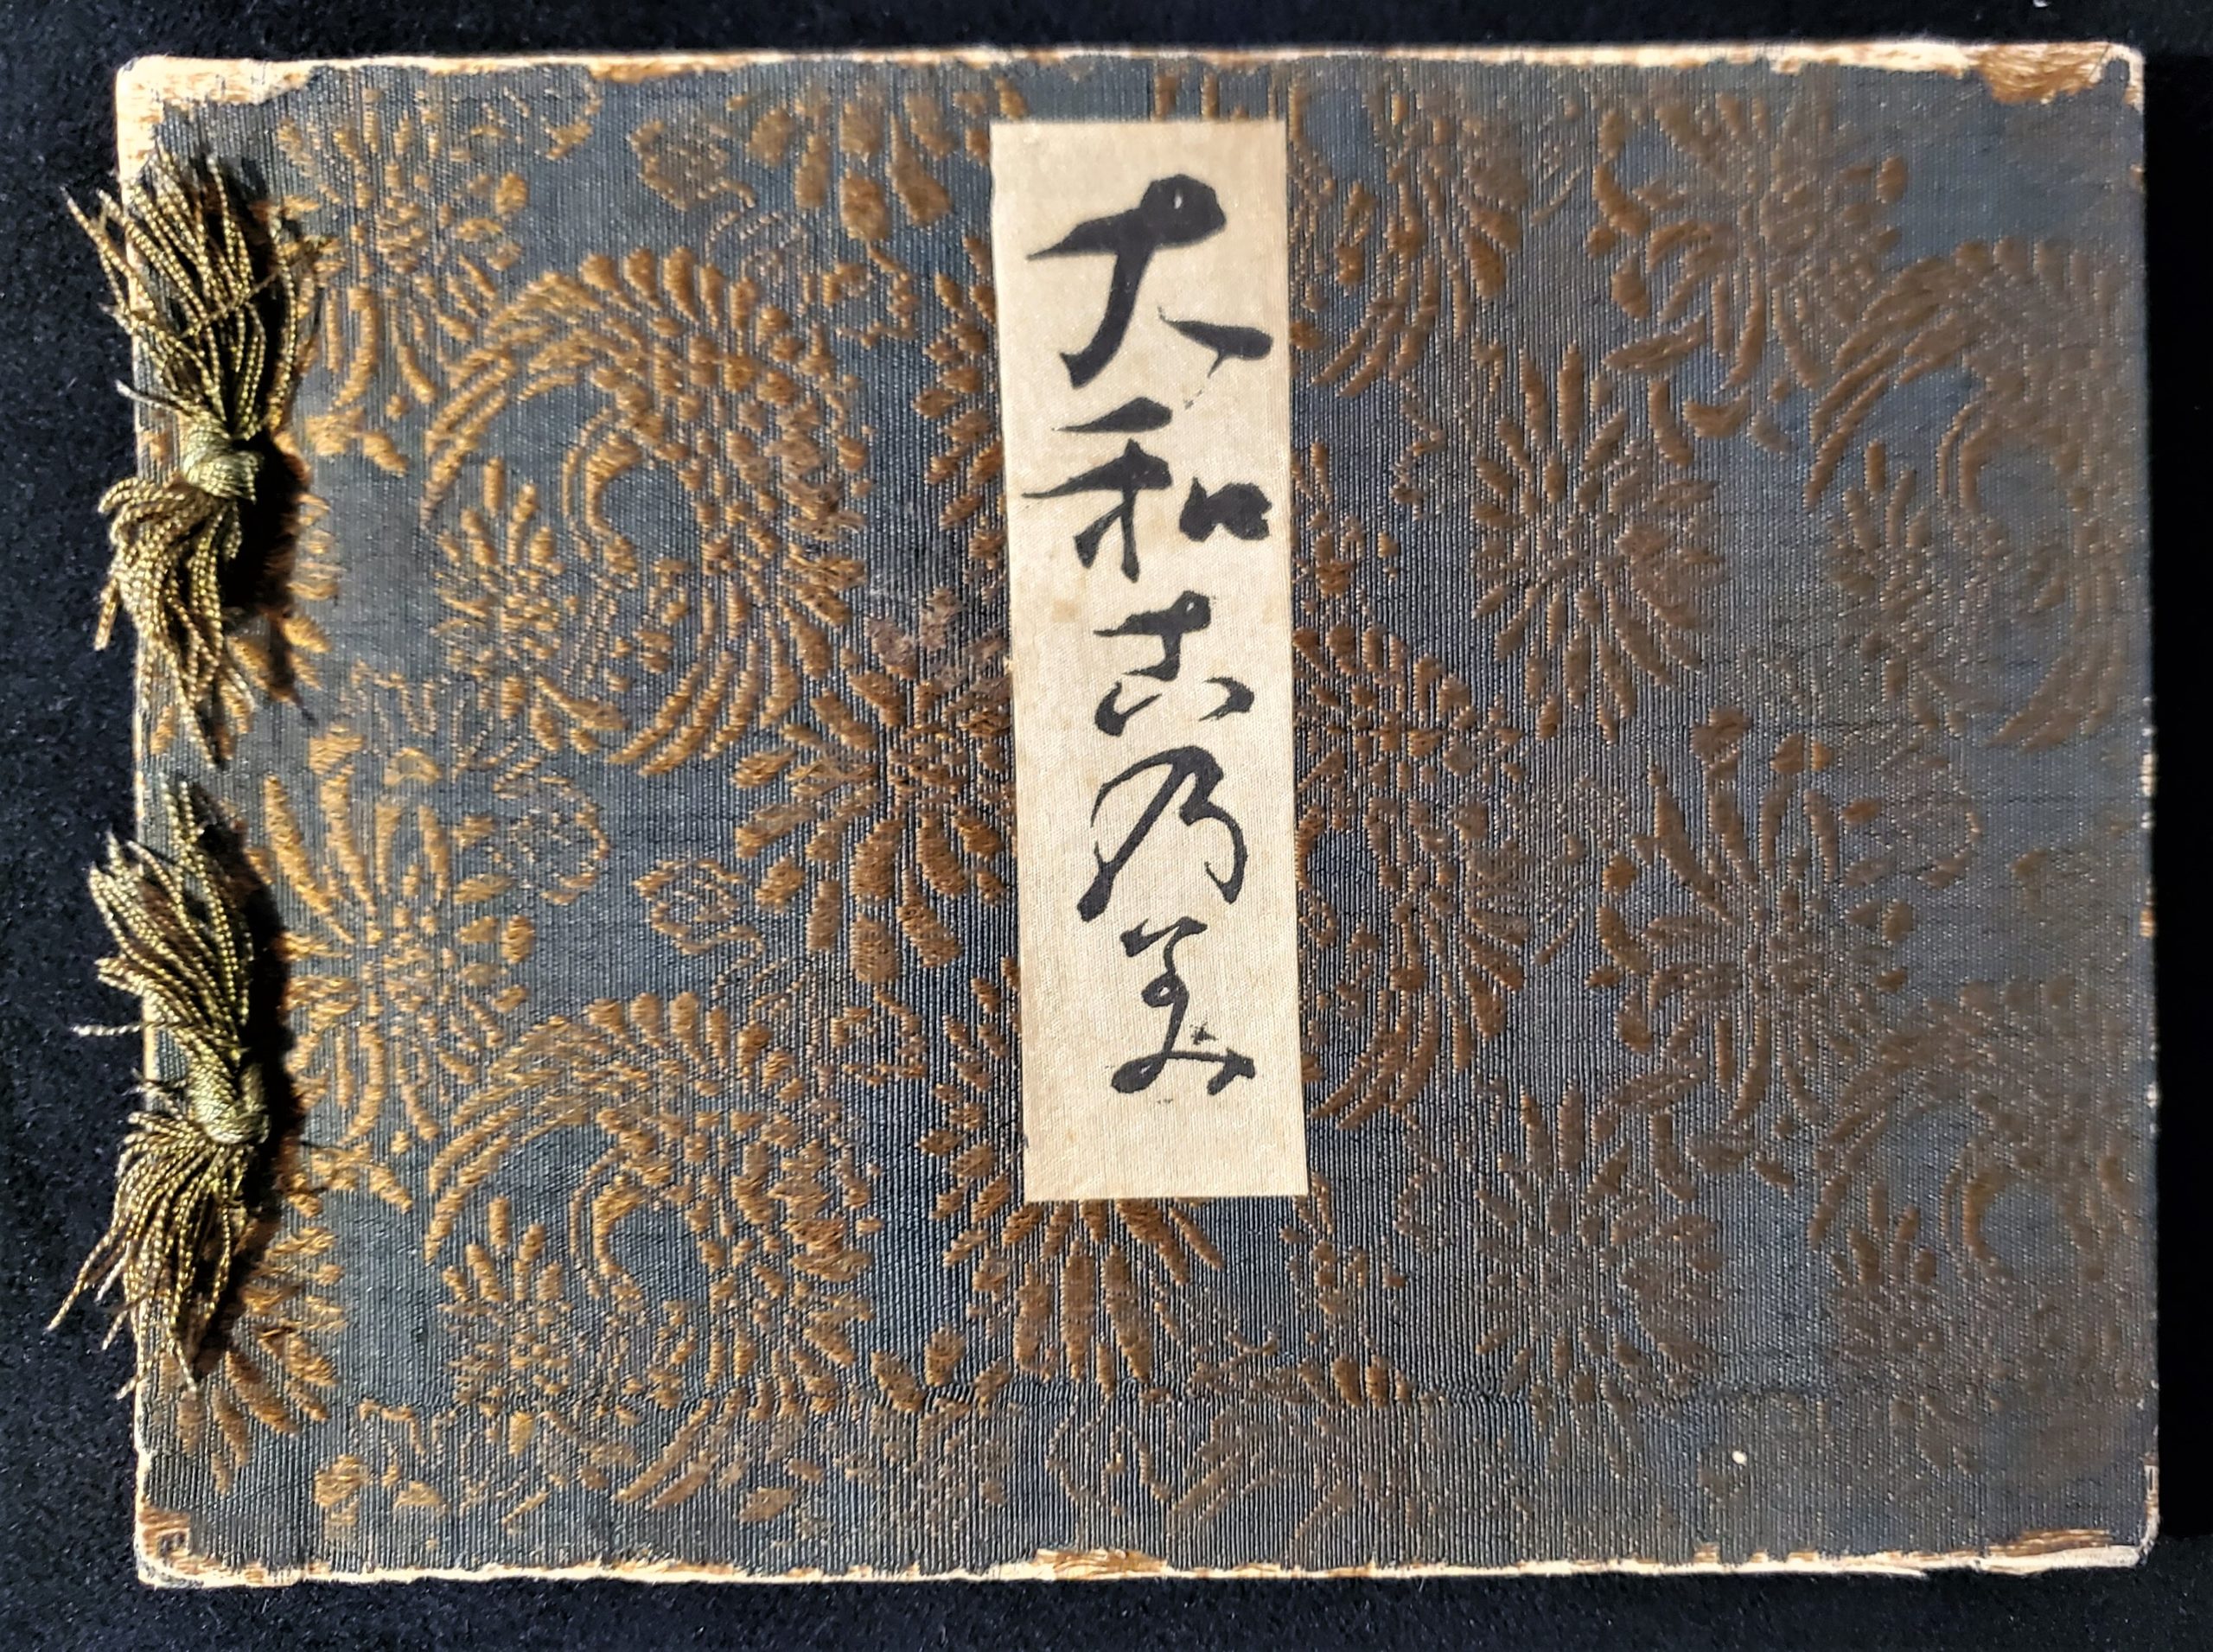 Image features the cover of the 1905 Yamanaka & Co. furnishings trade catalogue covered in green and gold silk brocade and bound on the left with gold silk threads. A vertical rectangular white paper panel with Japanese characters is in the center of the cover. Please scroll down to read the blog post about this object.